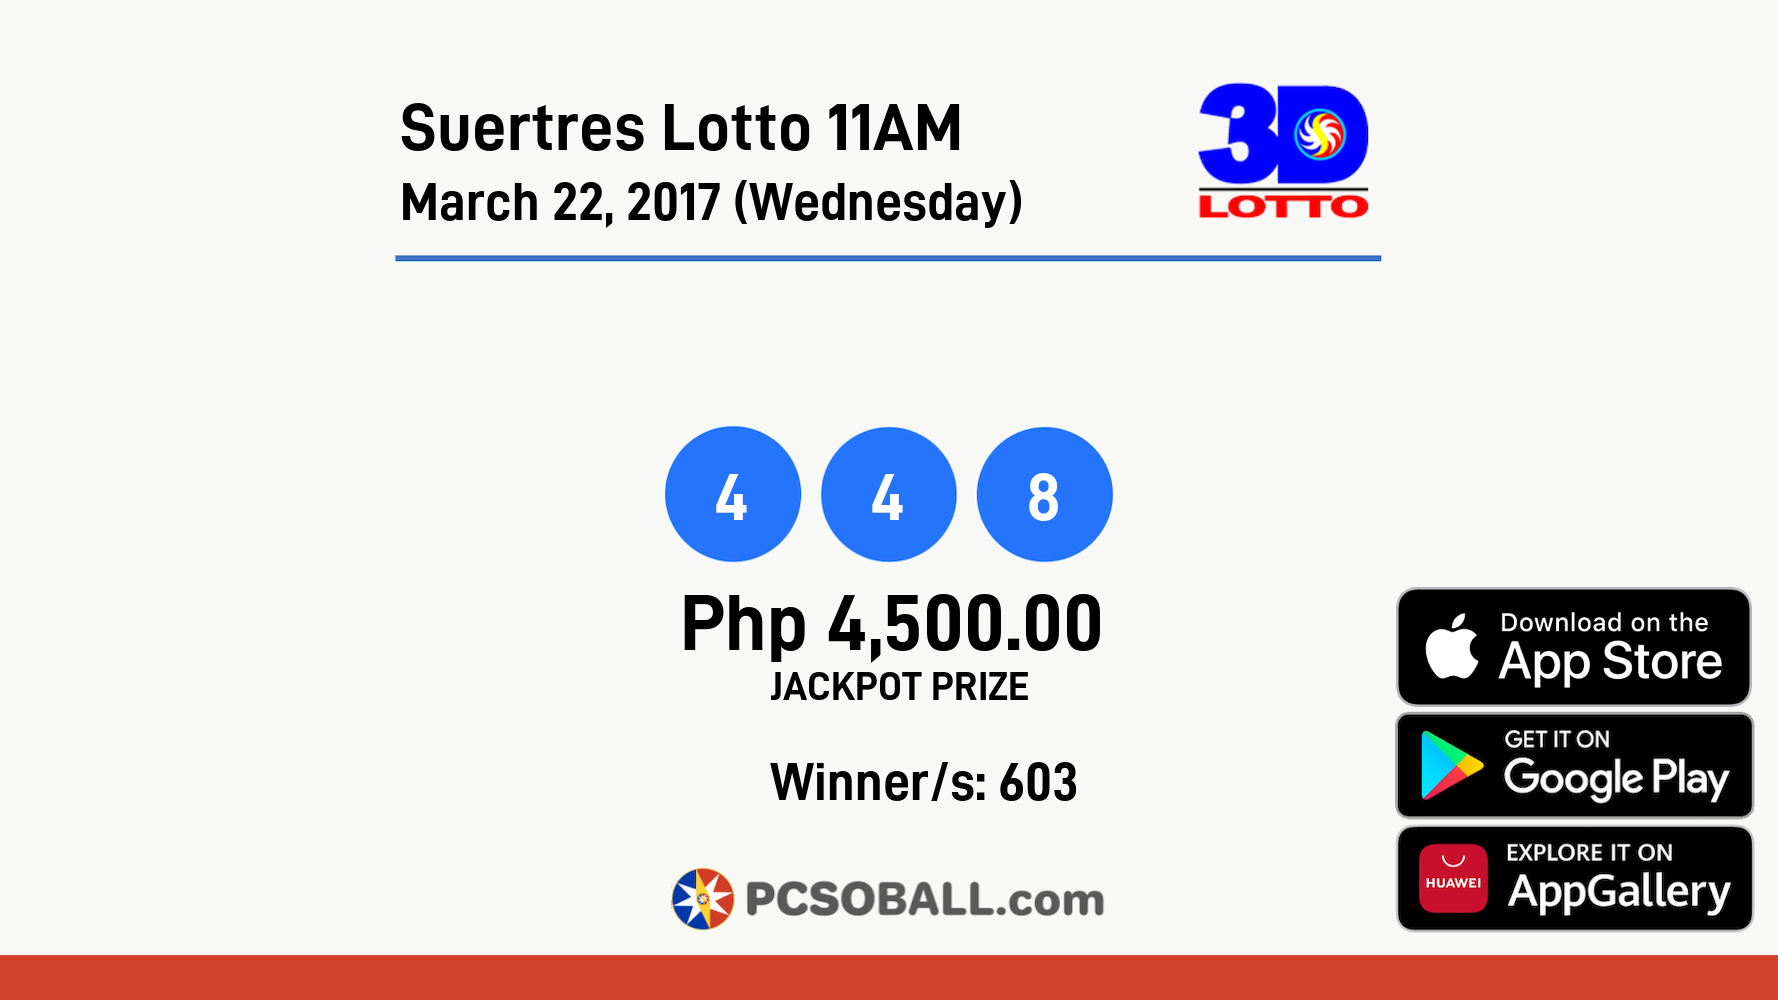 Suertres Lotto 11AM March 22, 2017 (Wednesday) Result